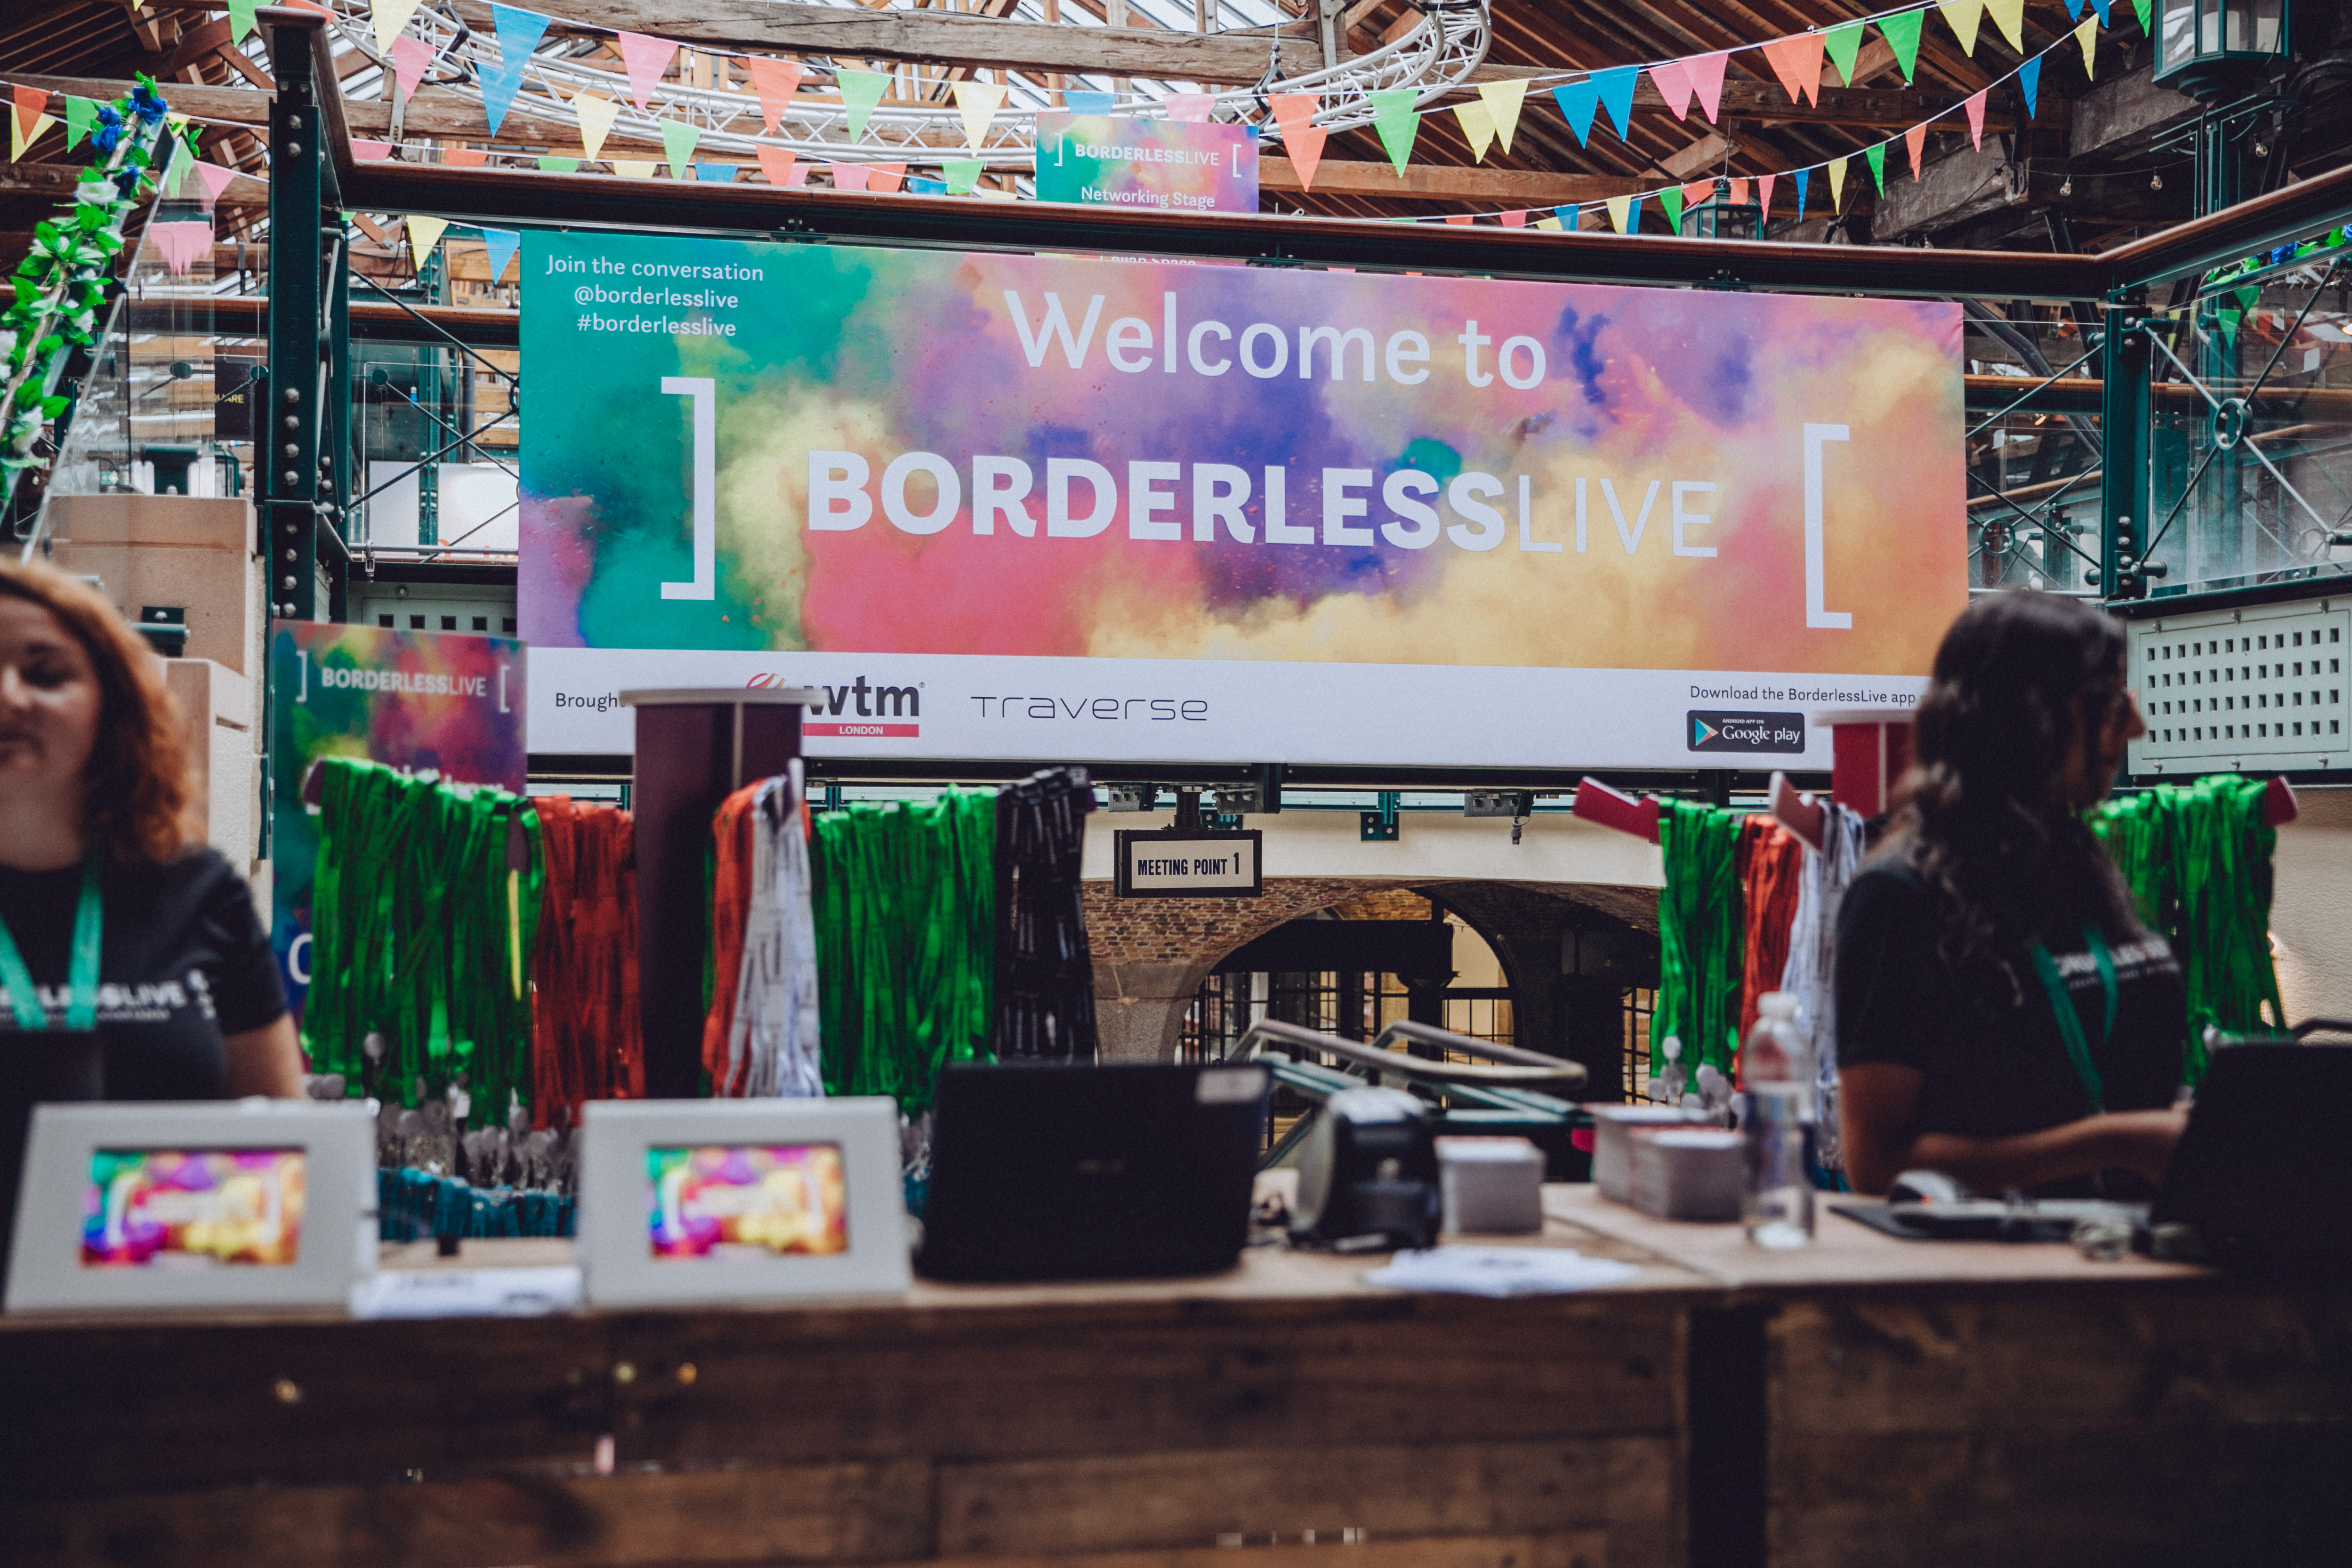 BorderlessLive colourful banner and bunting in the background